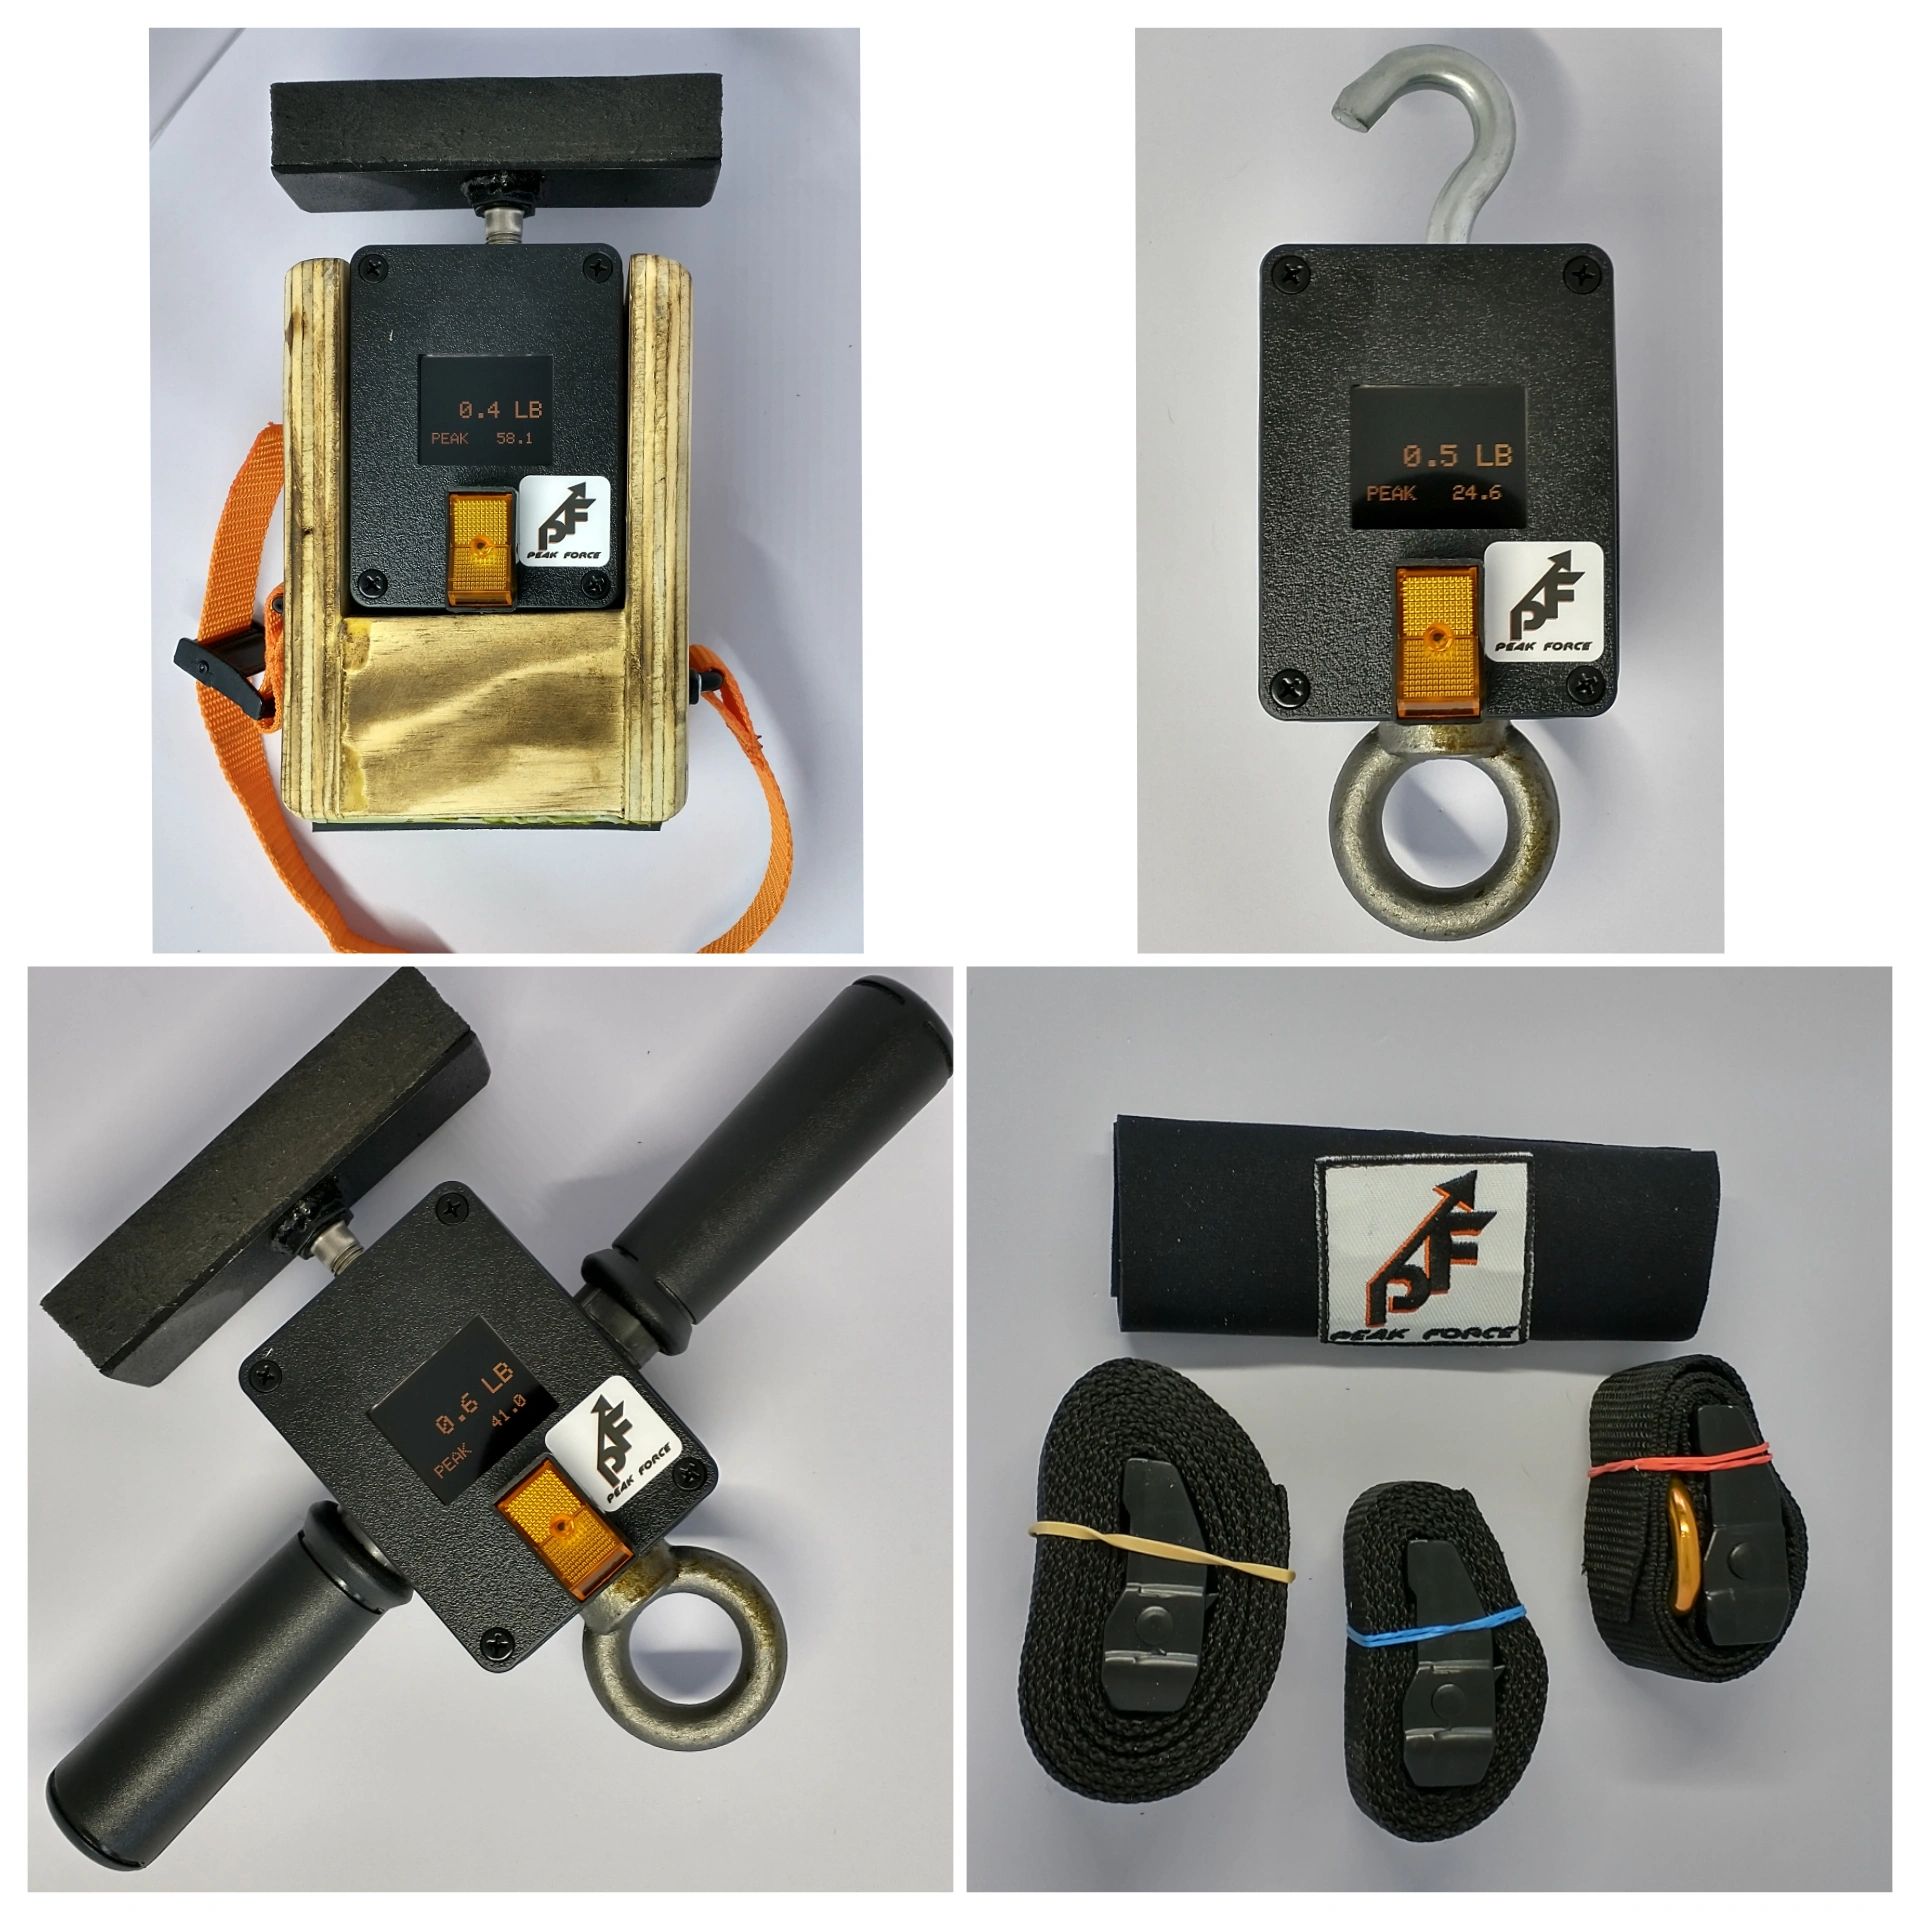 Handehld dynamometer in push, pull and holster configuration